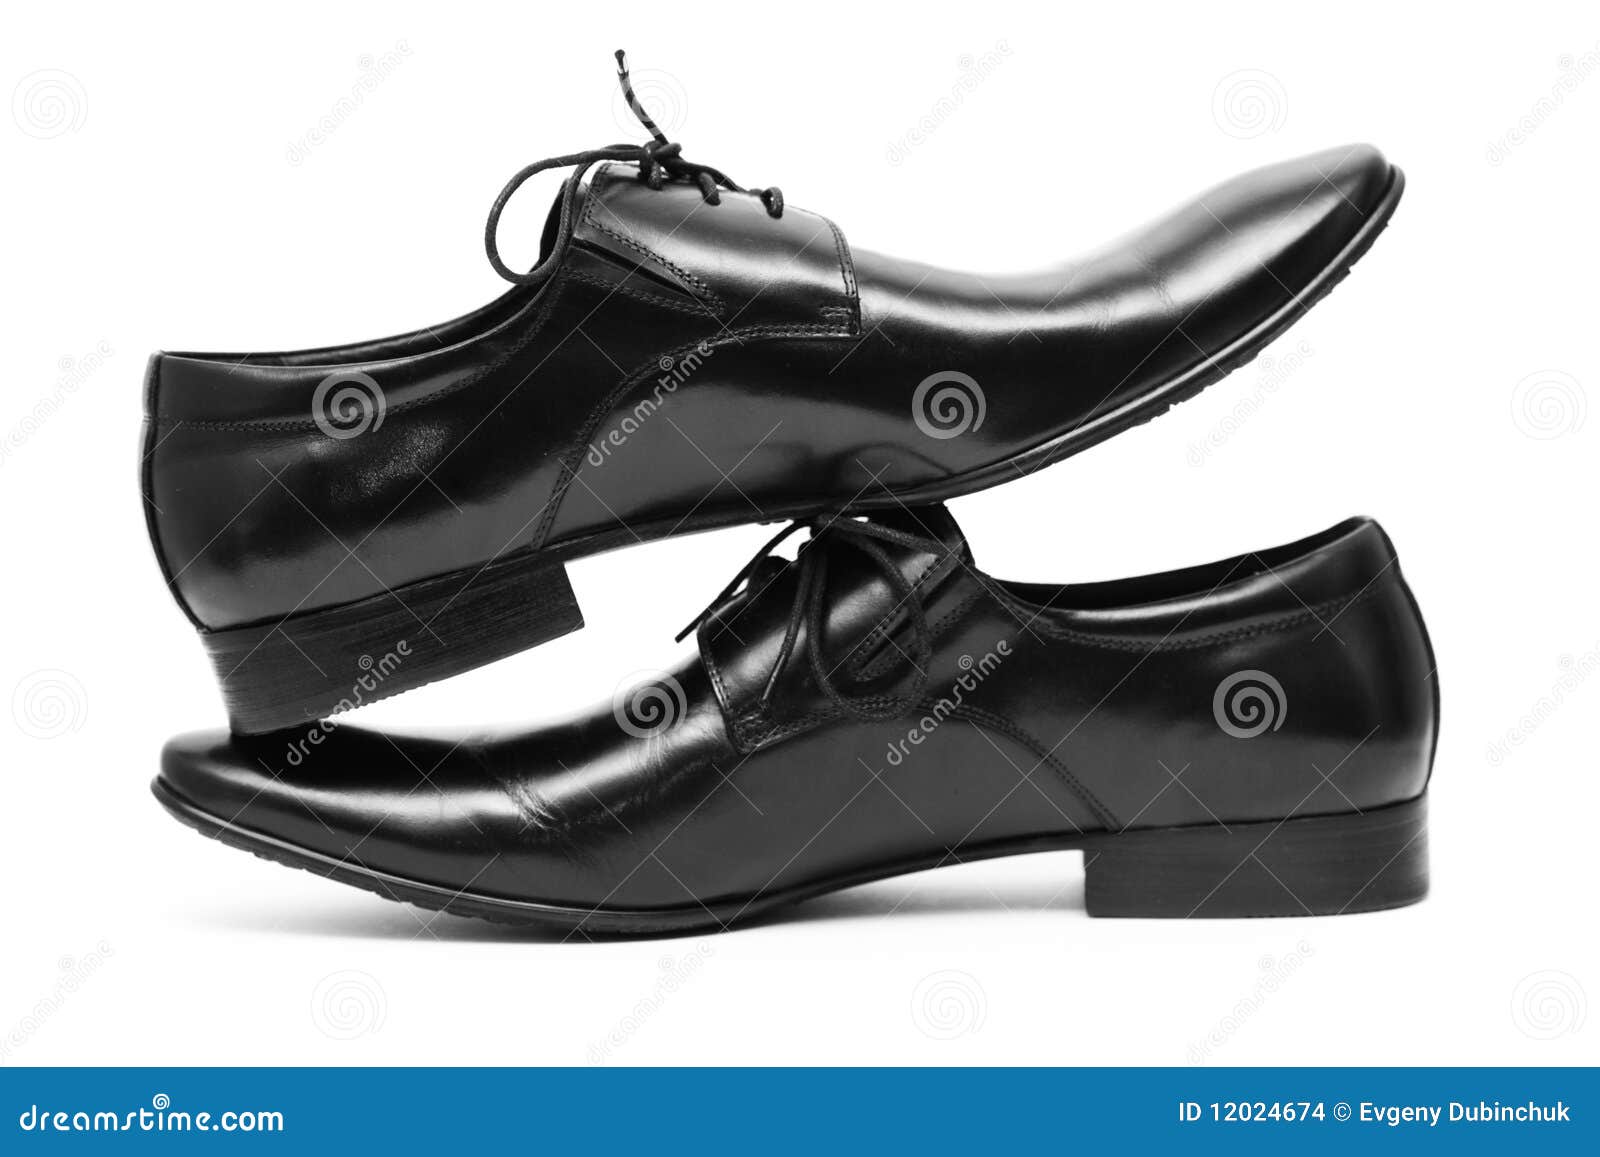 Classic Black Men S Shoes Standing on Each Other Stock Photo - Image of ...